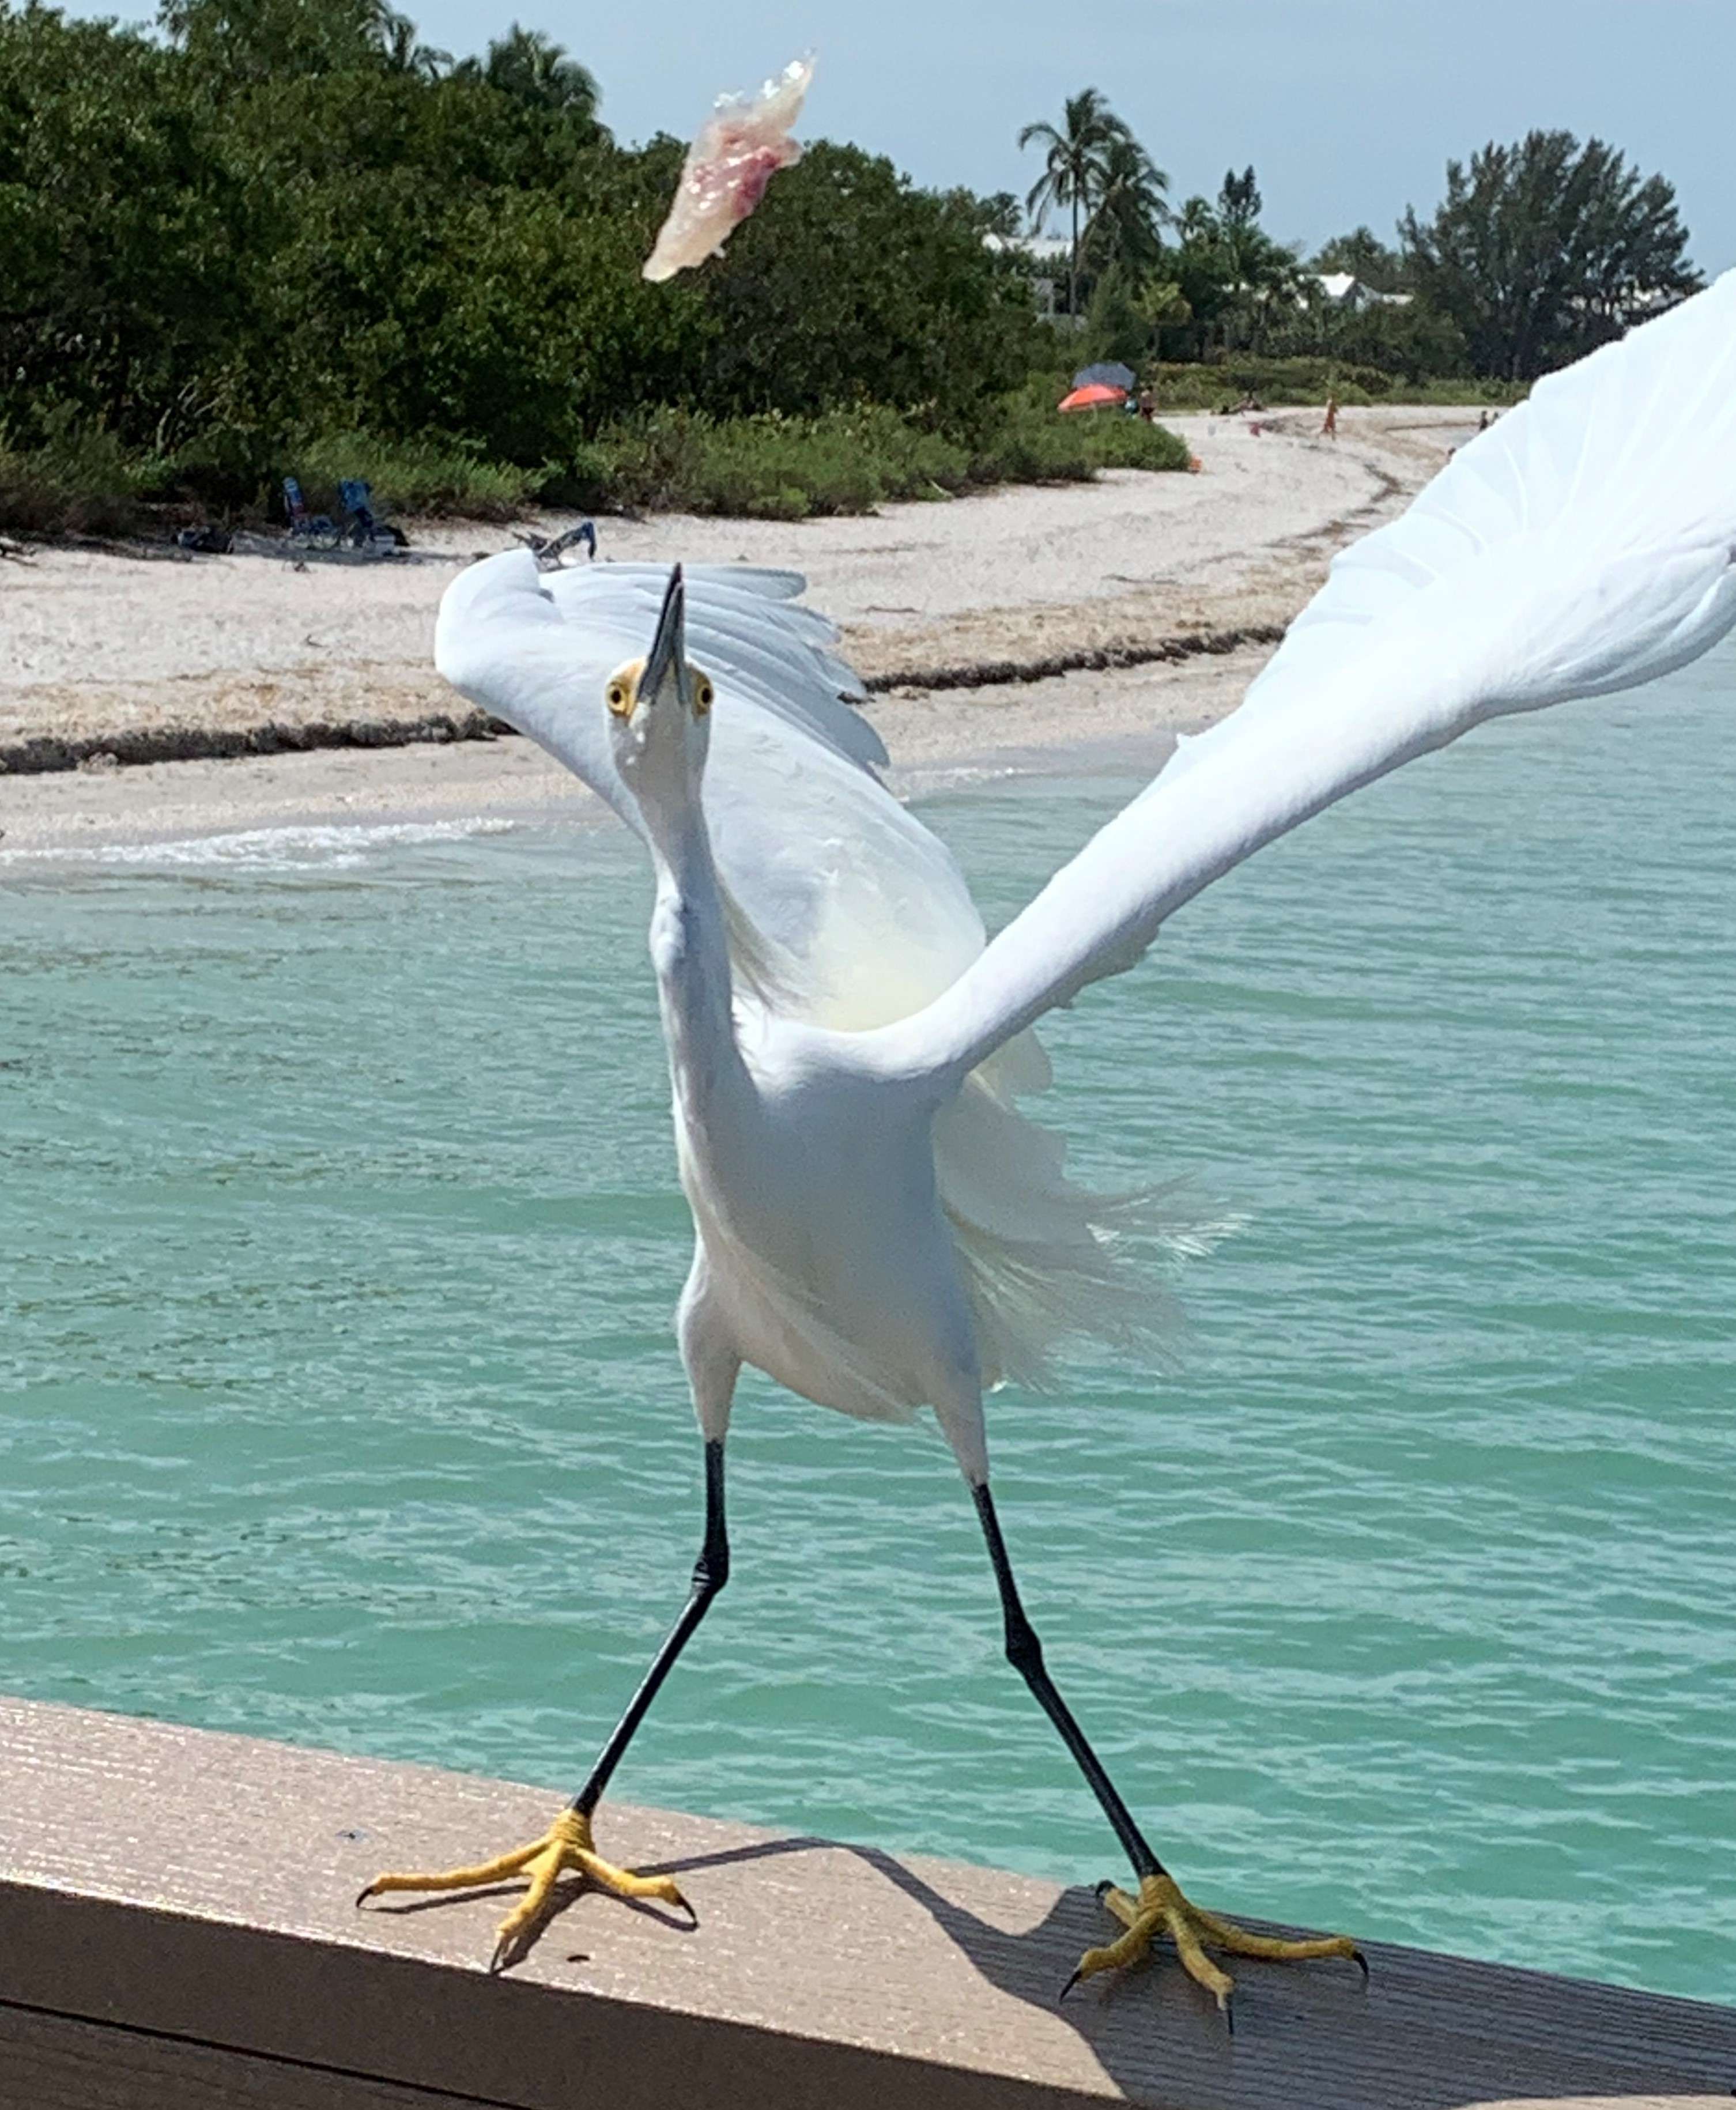 The snowy egret catches a piece of fish